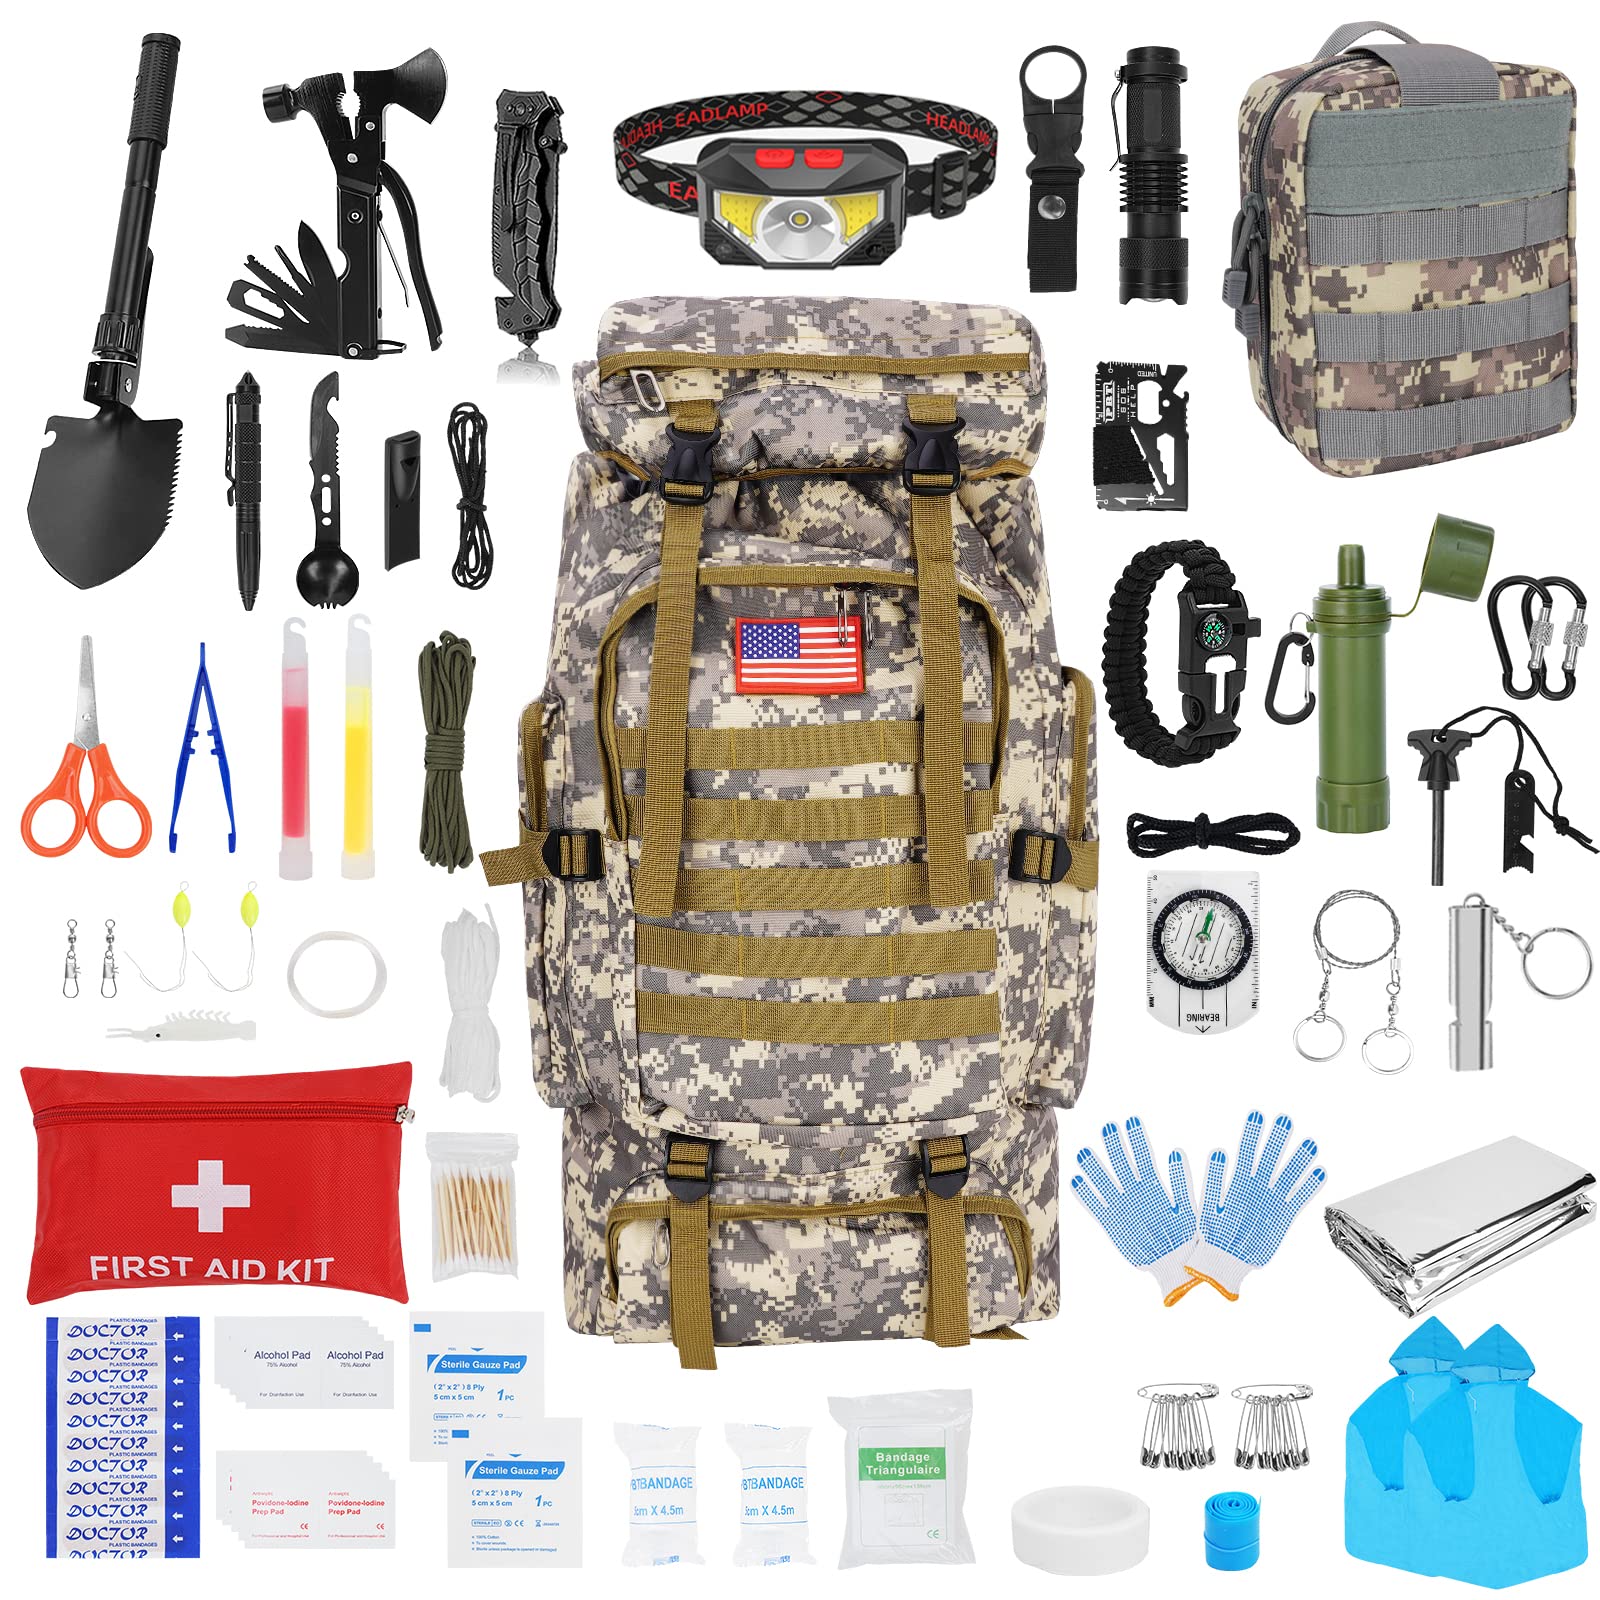 Survival Gear Professional Kit and Large Camping Backpack,First